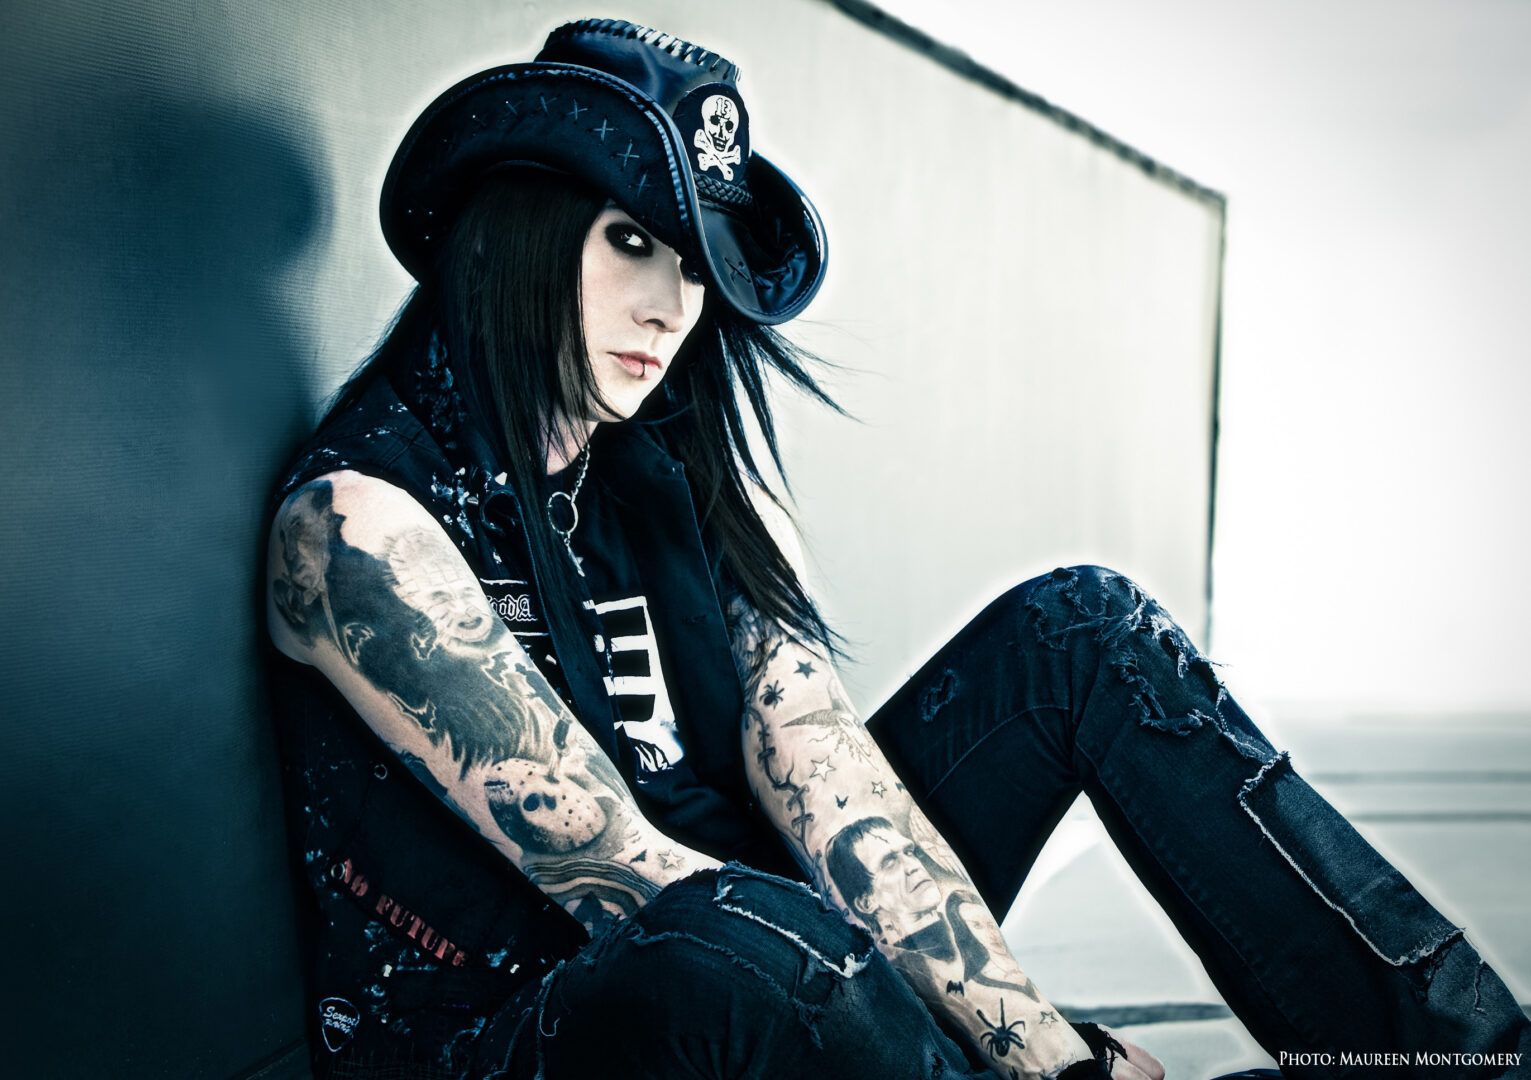 Wednesday 13 Announces “Monsters of the Universe Australian Tour 2016”